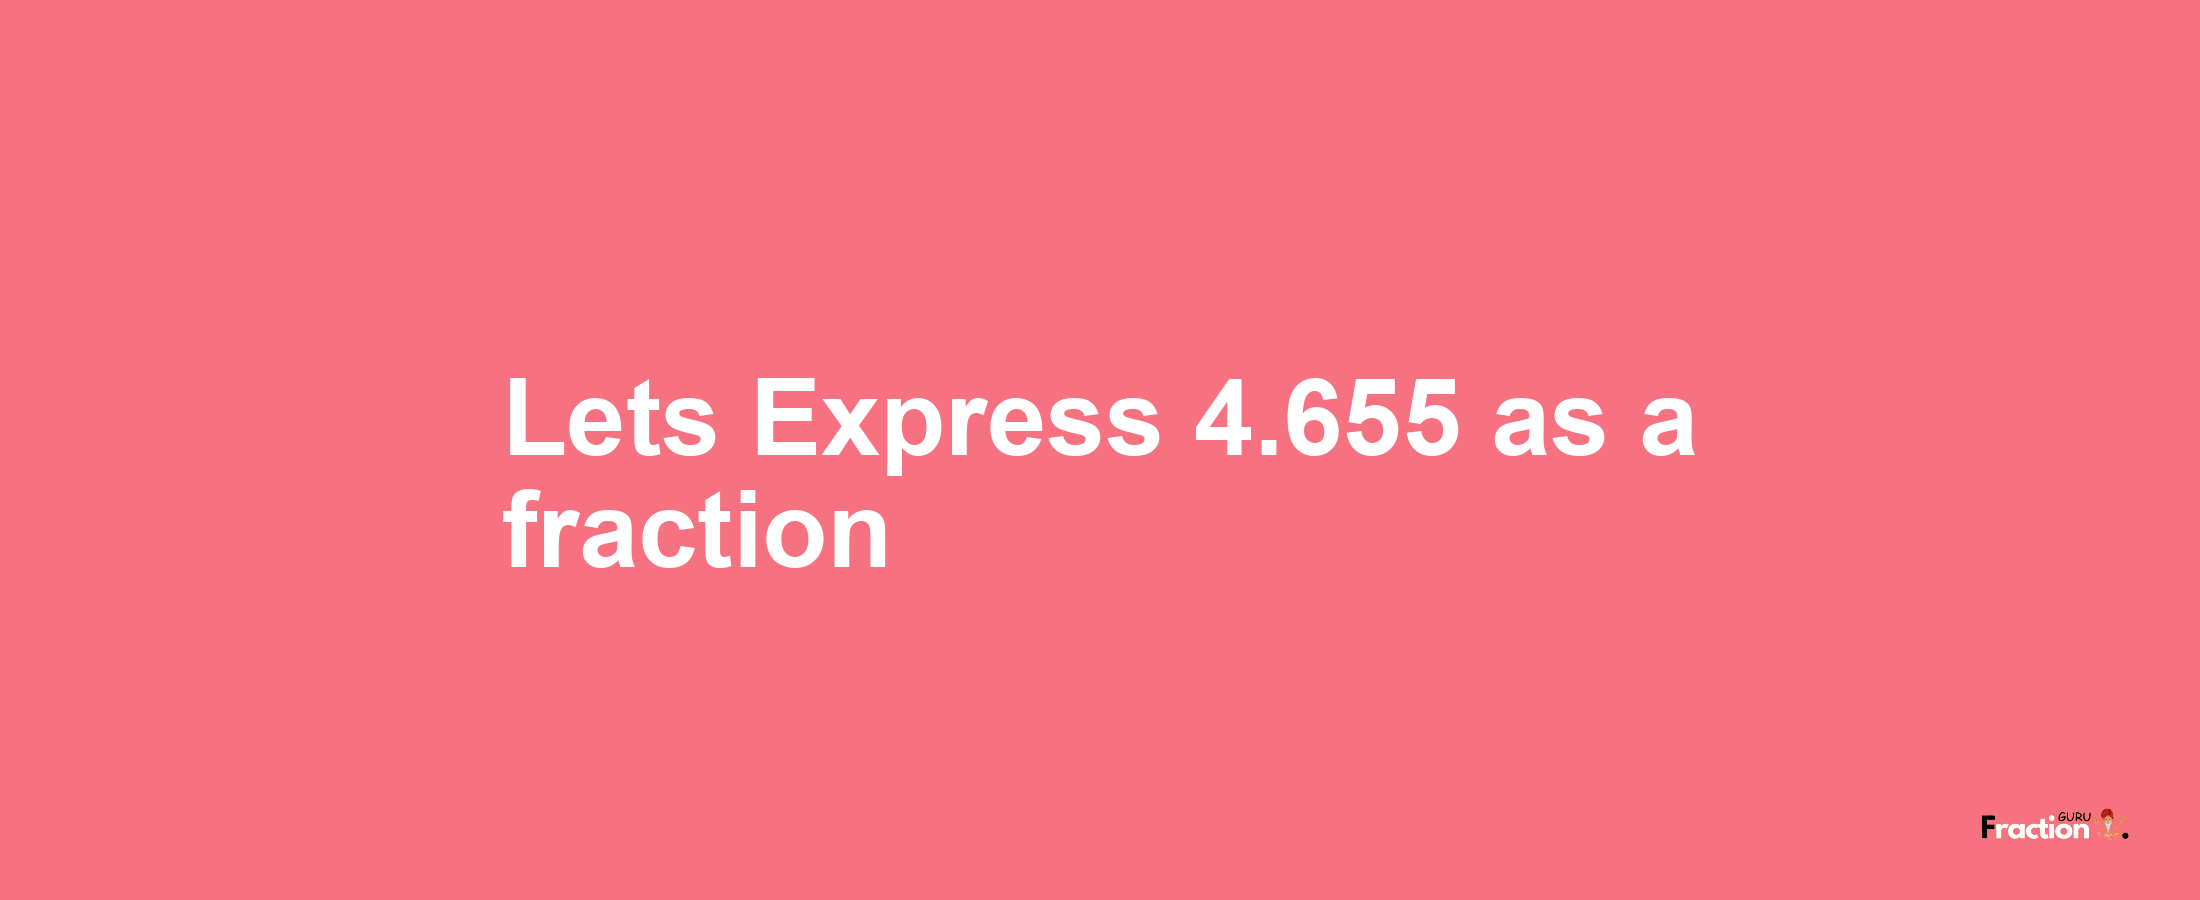 Lets Express 4.655 as afraction